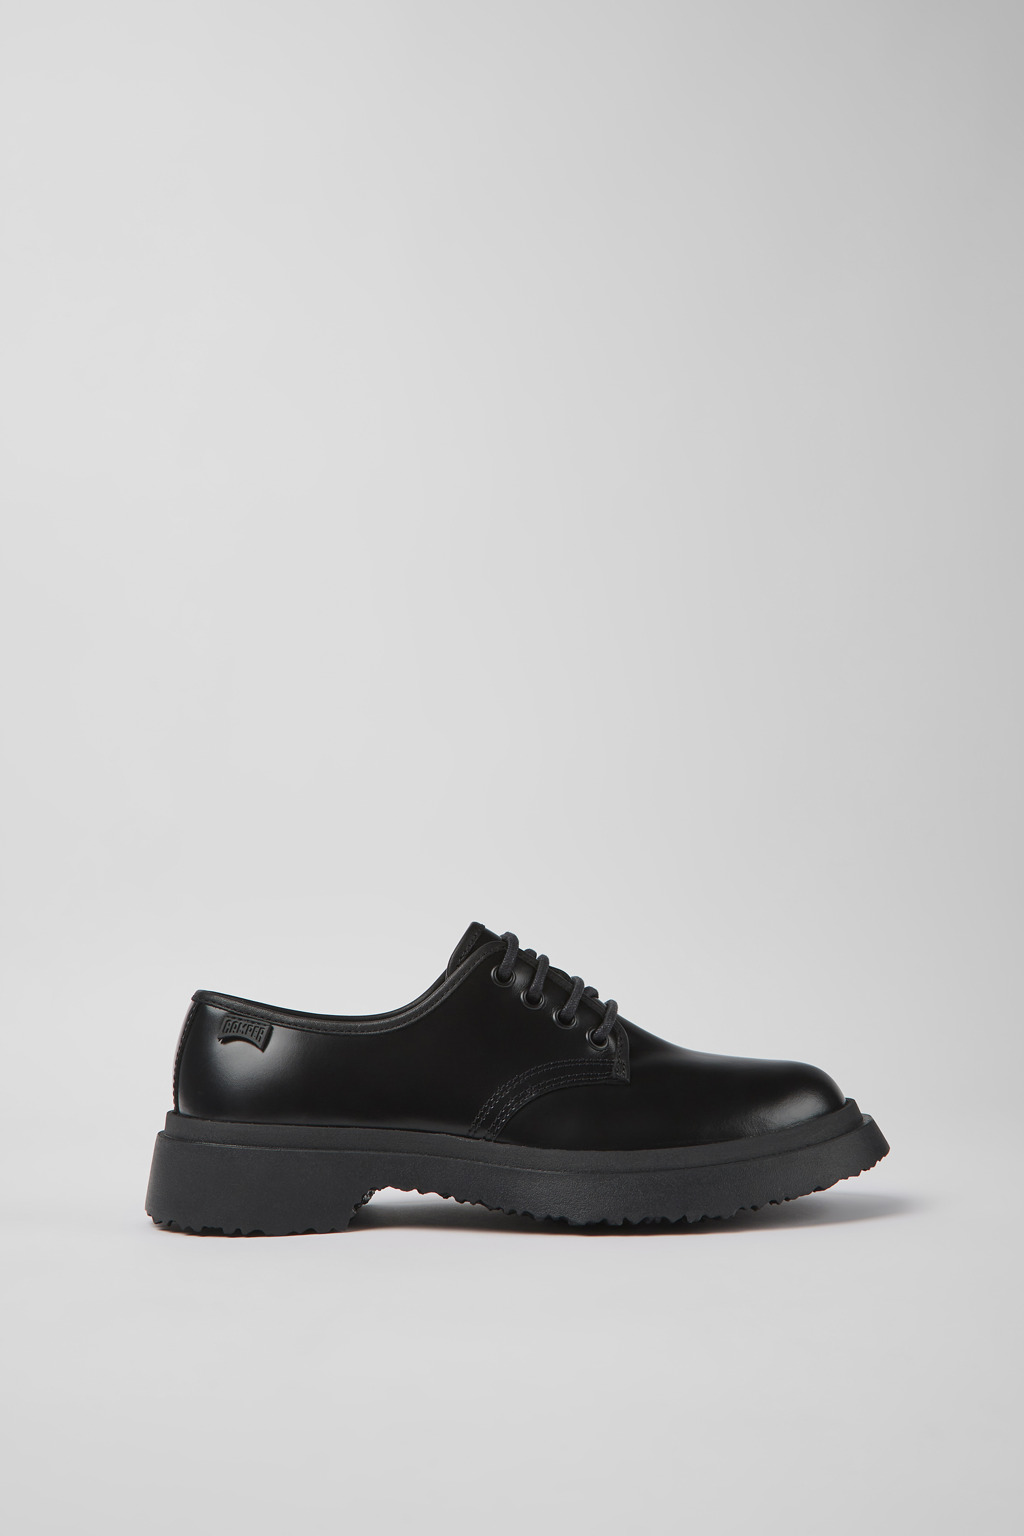 Walden Black Lace-Up for Women - Fall/Winter collection - Camper 